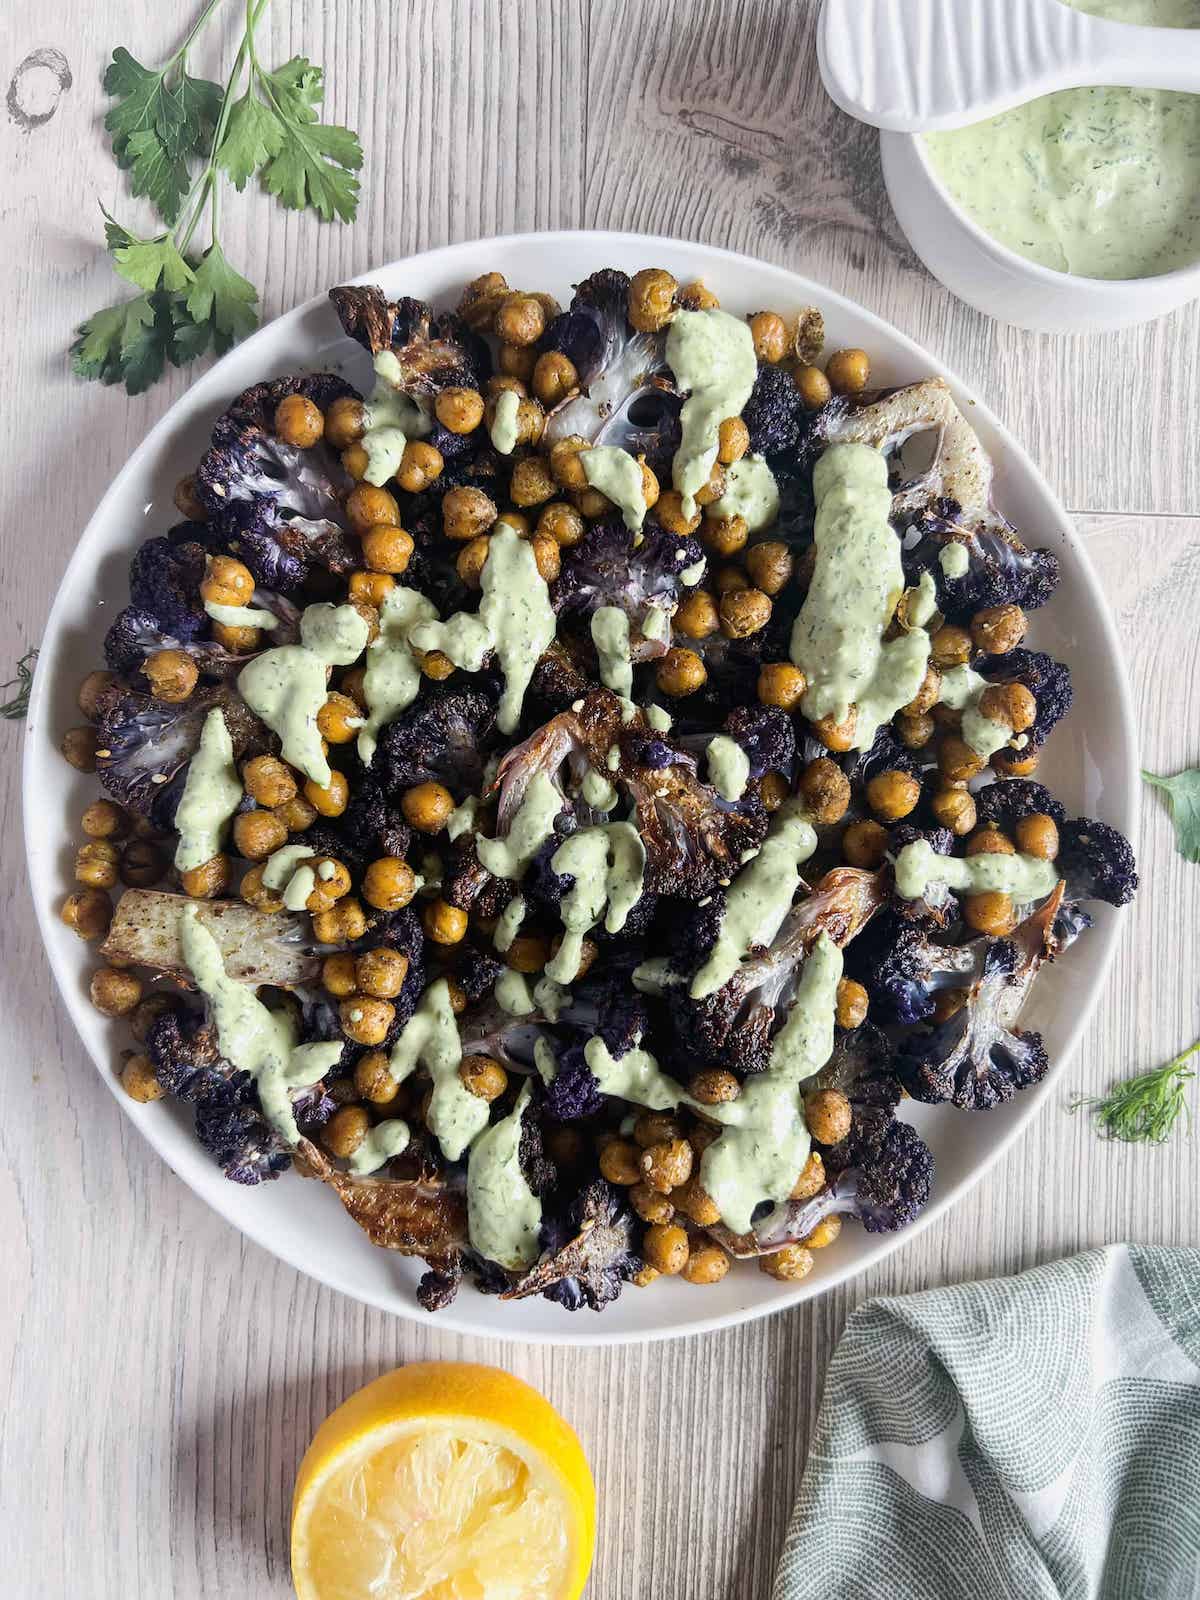 Roasted purple cauliflower and chickpeas drizzled with lemon herb tahini sauce in a white bowl.